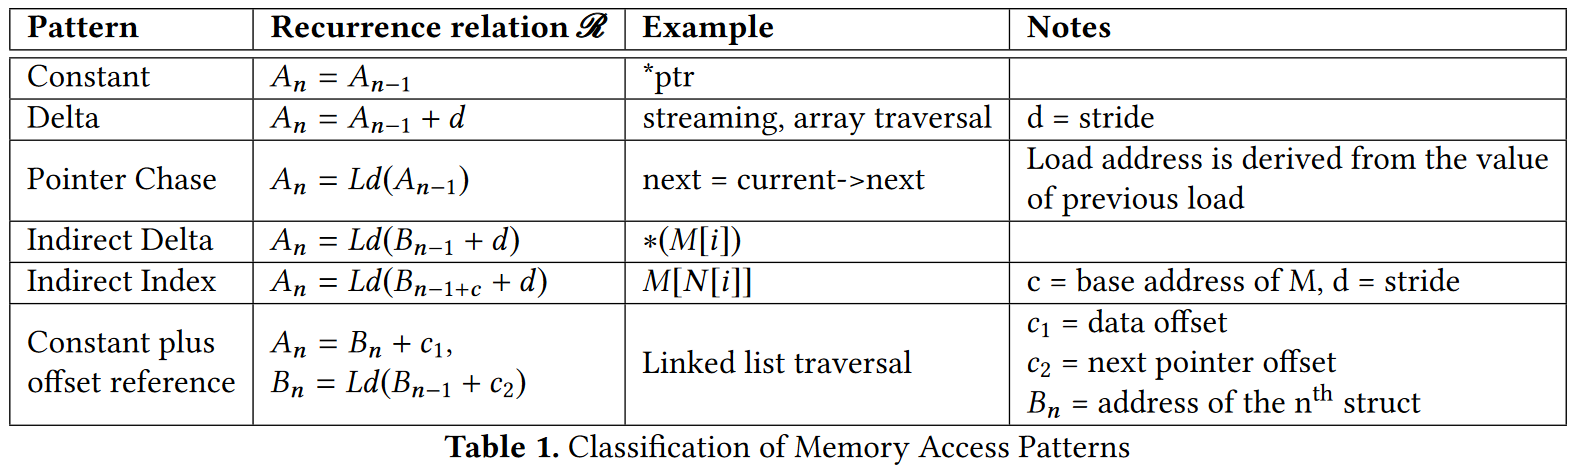 Classification of Memory Access Patterns